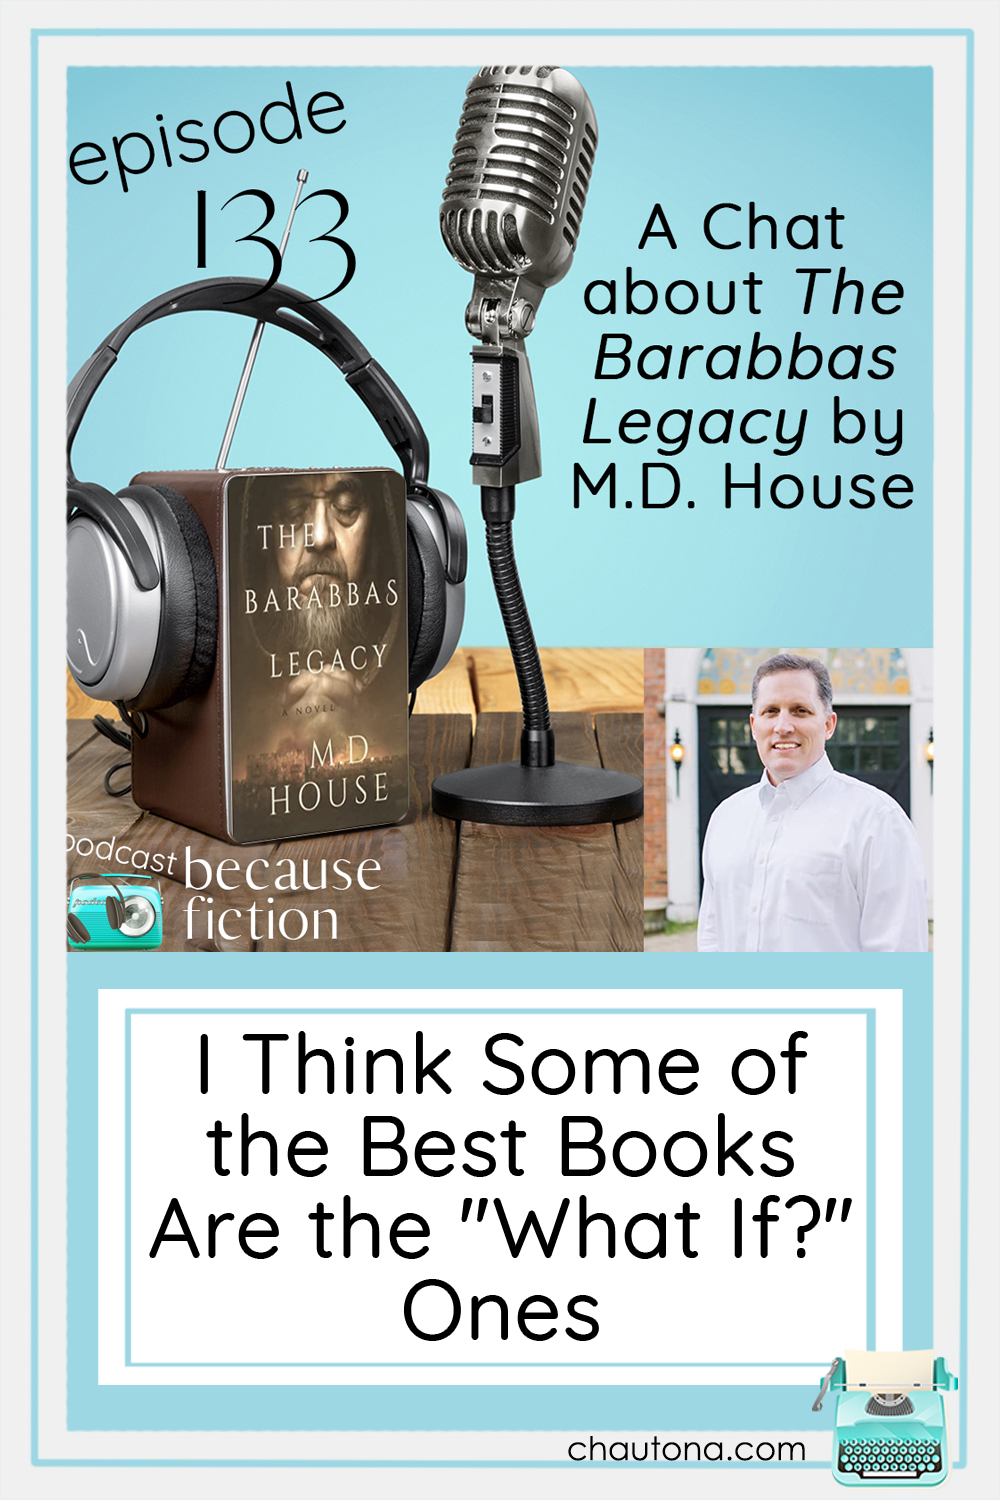 The Barabbas Legacy is the final book in the Barabbas Trilogy, and M.D. House is back to tell us some of the cool things he put in this book! via @chautonahavig